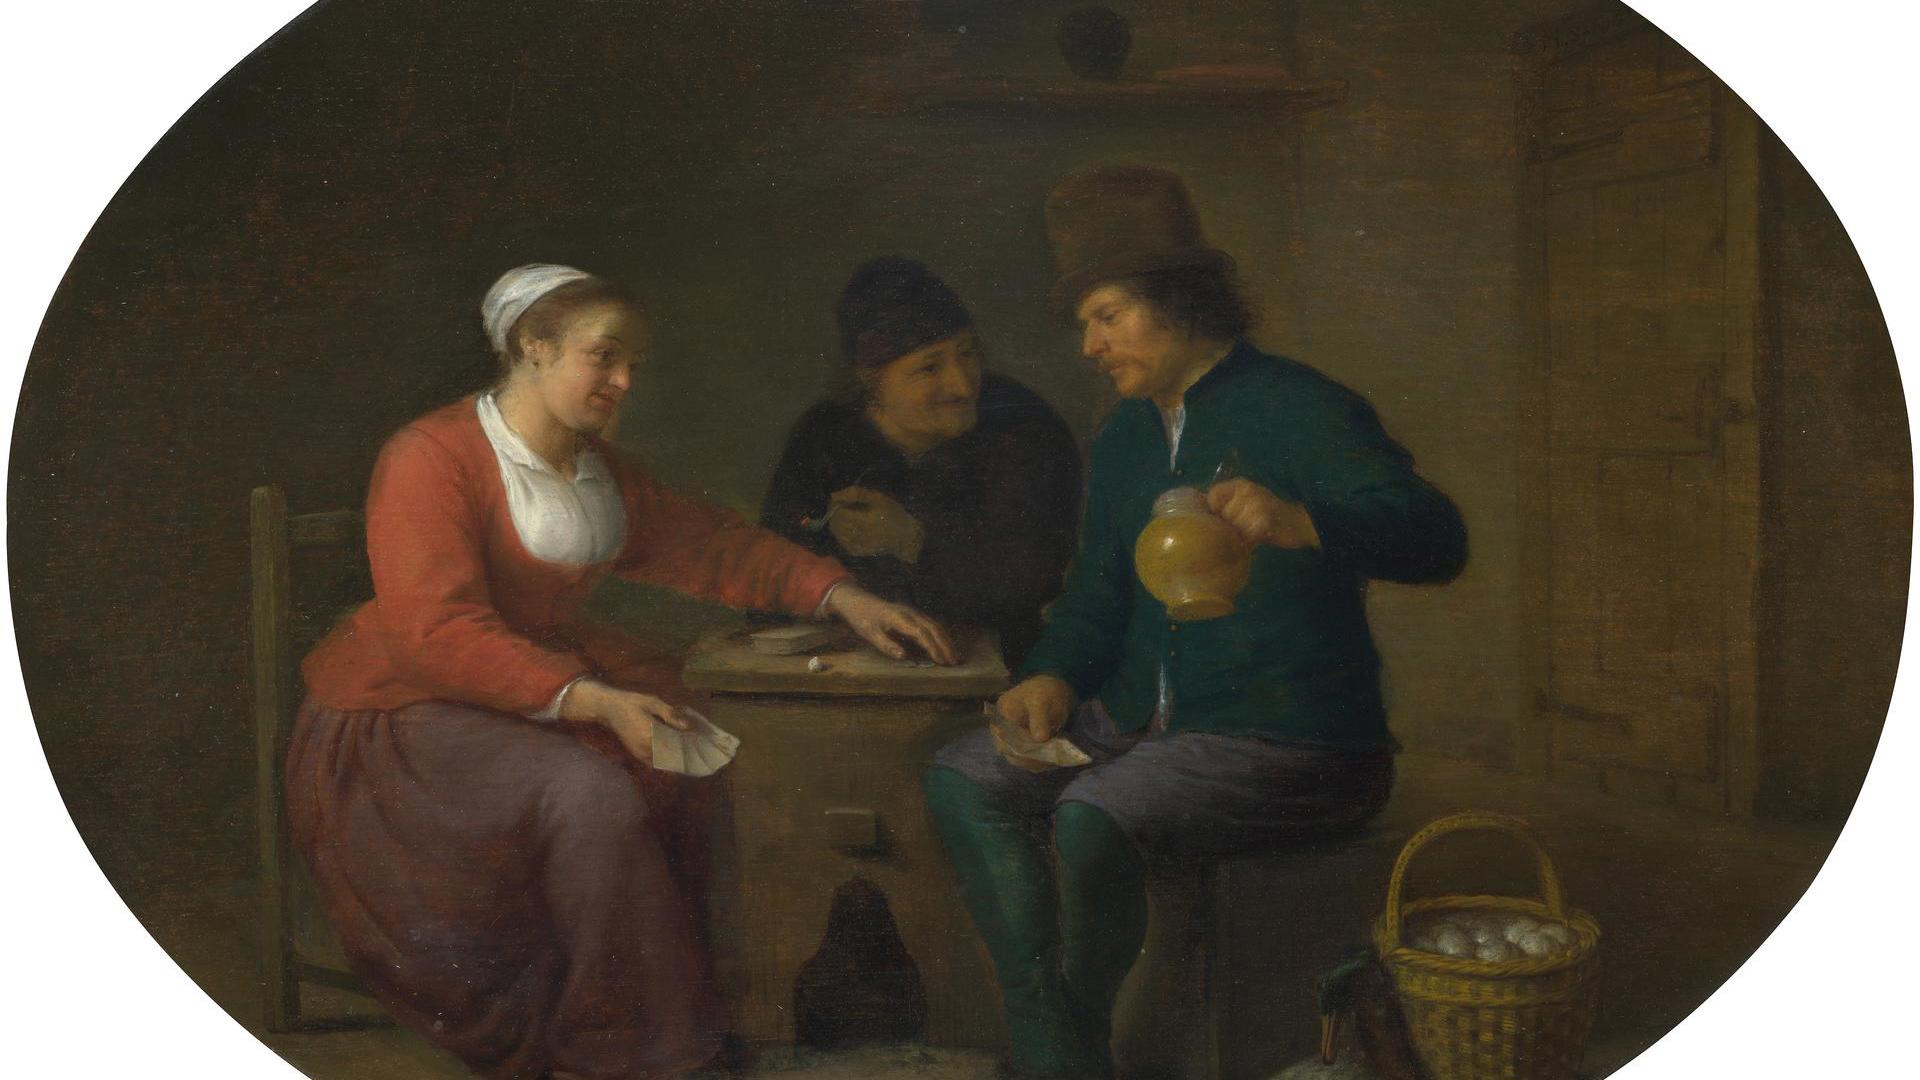 A Woman playing Cards with Two Peasants by Hendrick Sorgh